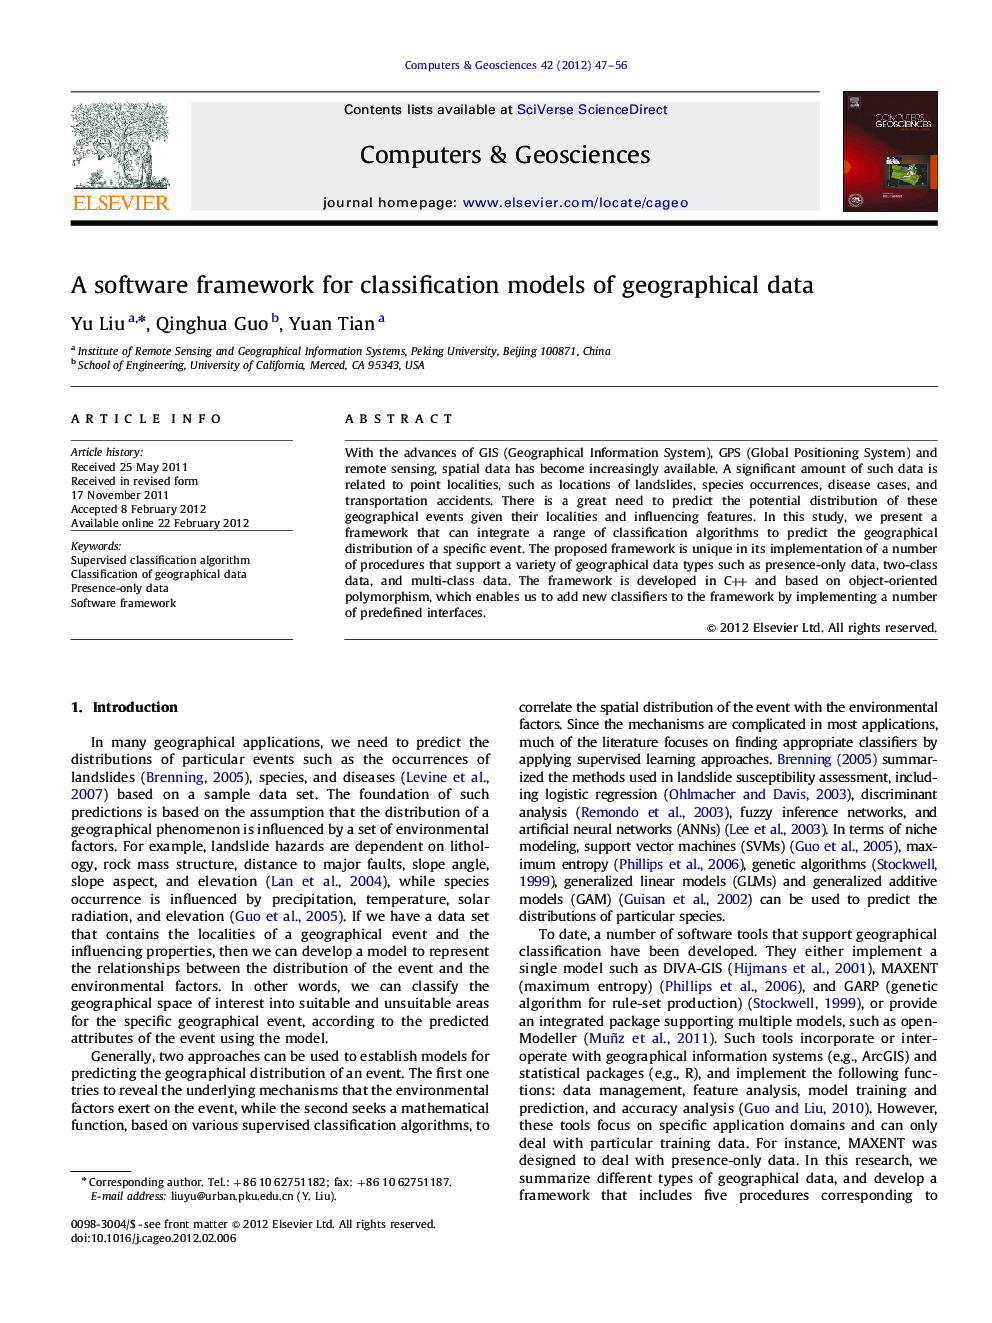 A software framework for classification models of geographical data